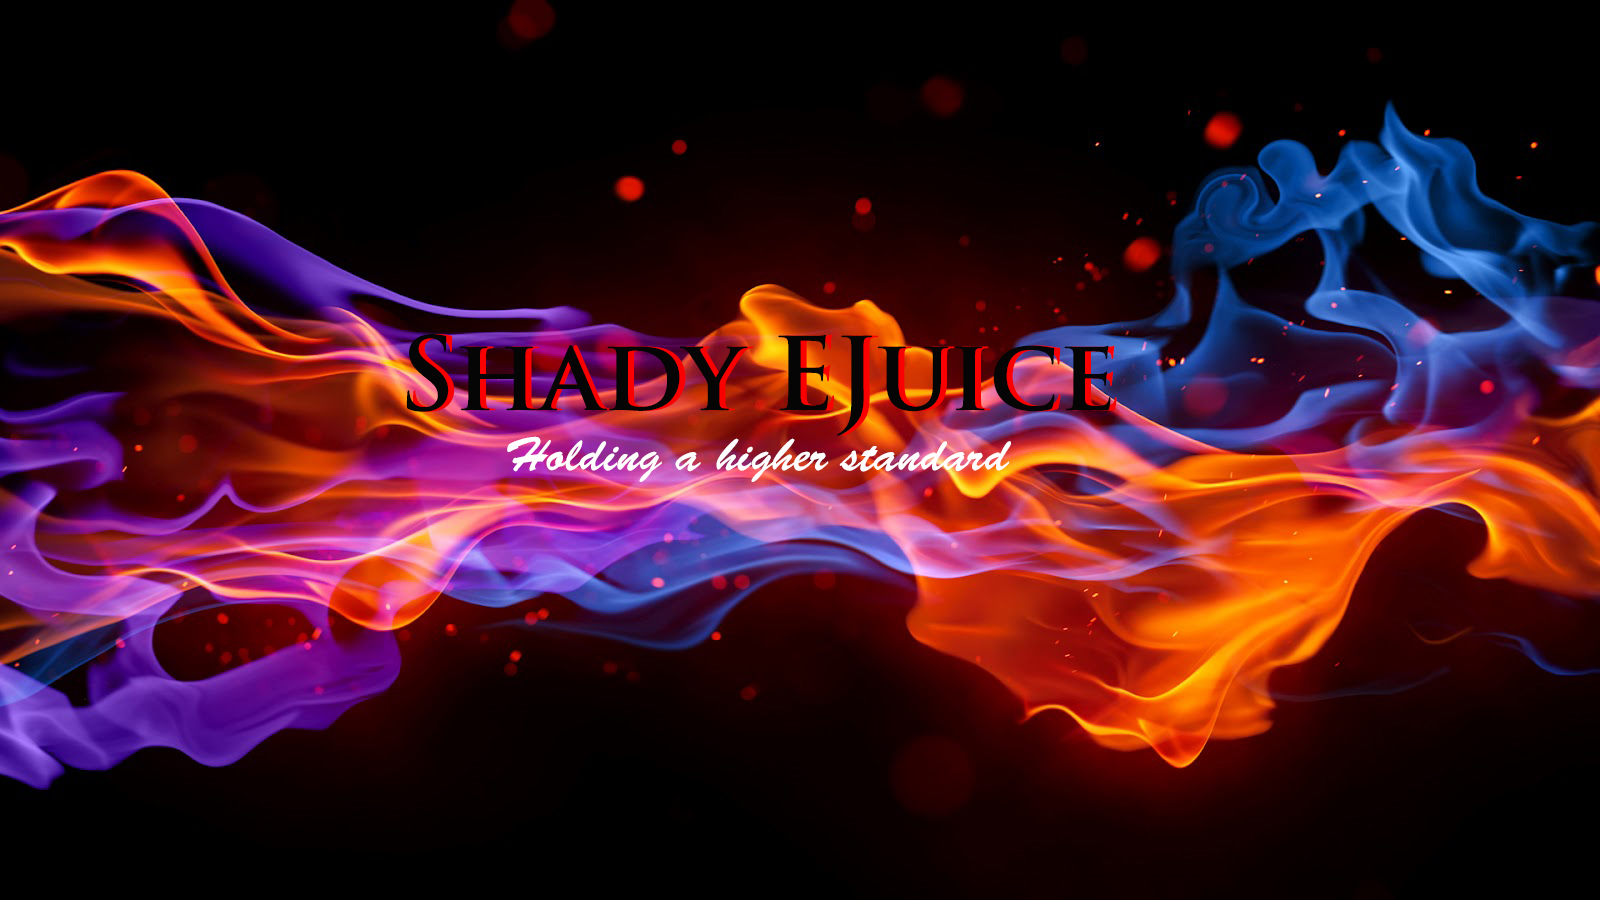 products, shady e juice, business wallpapers for tablet